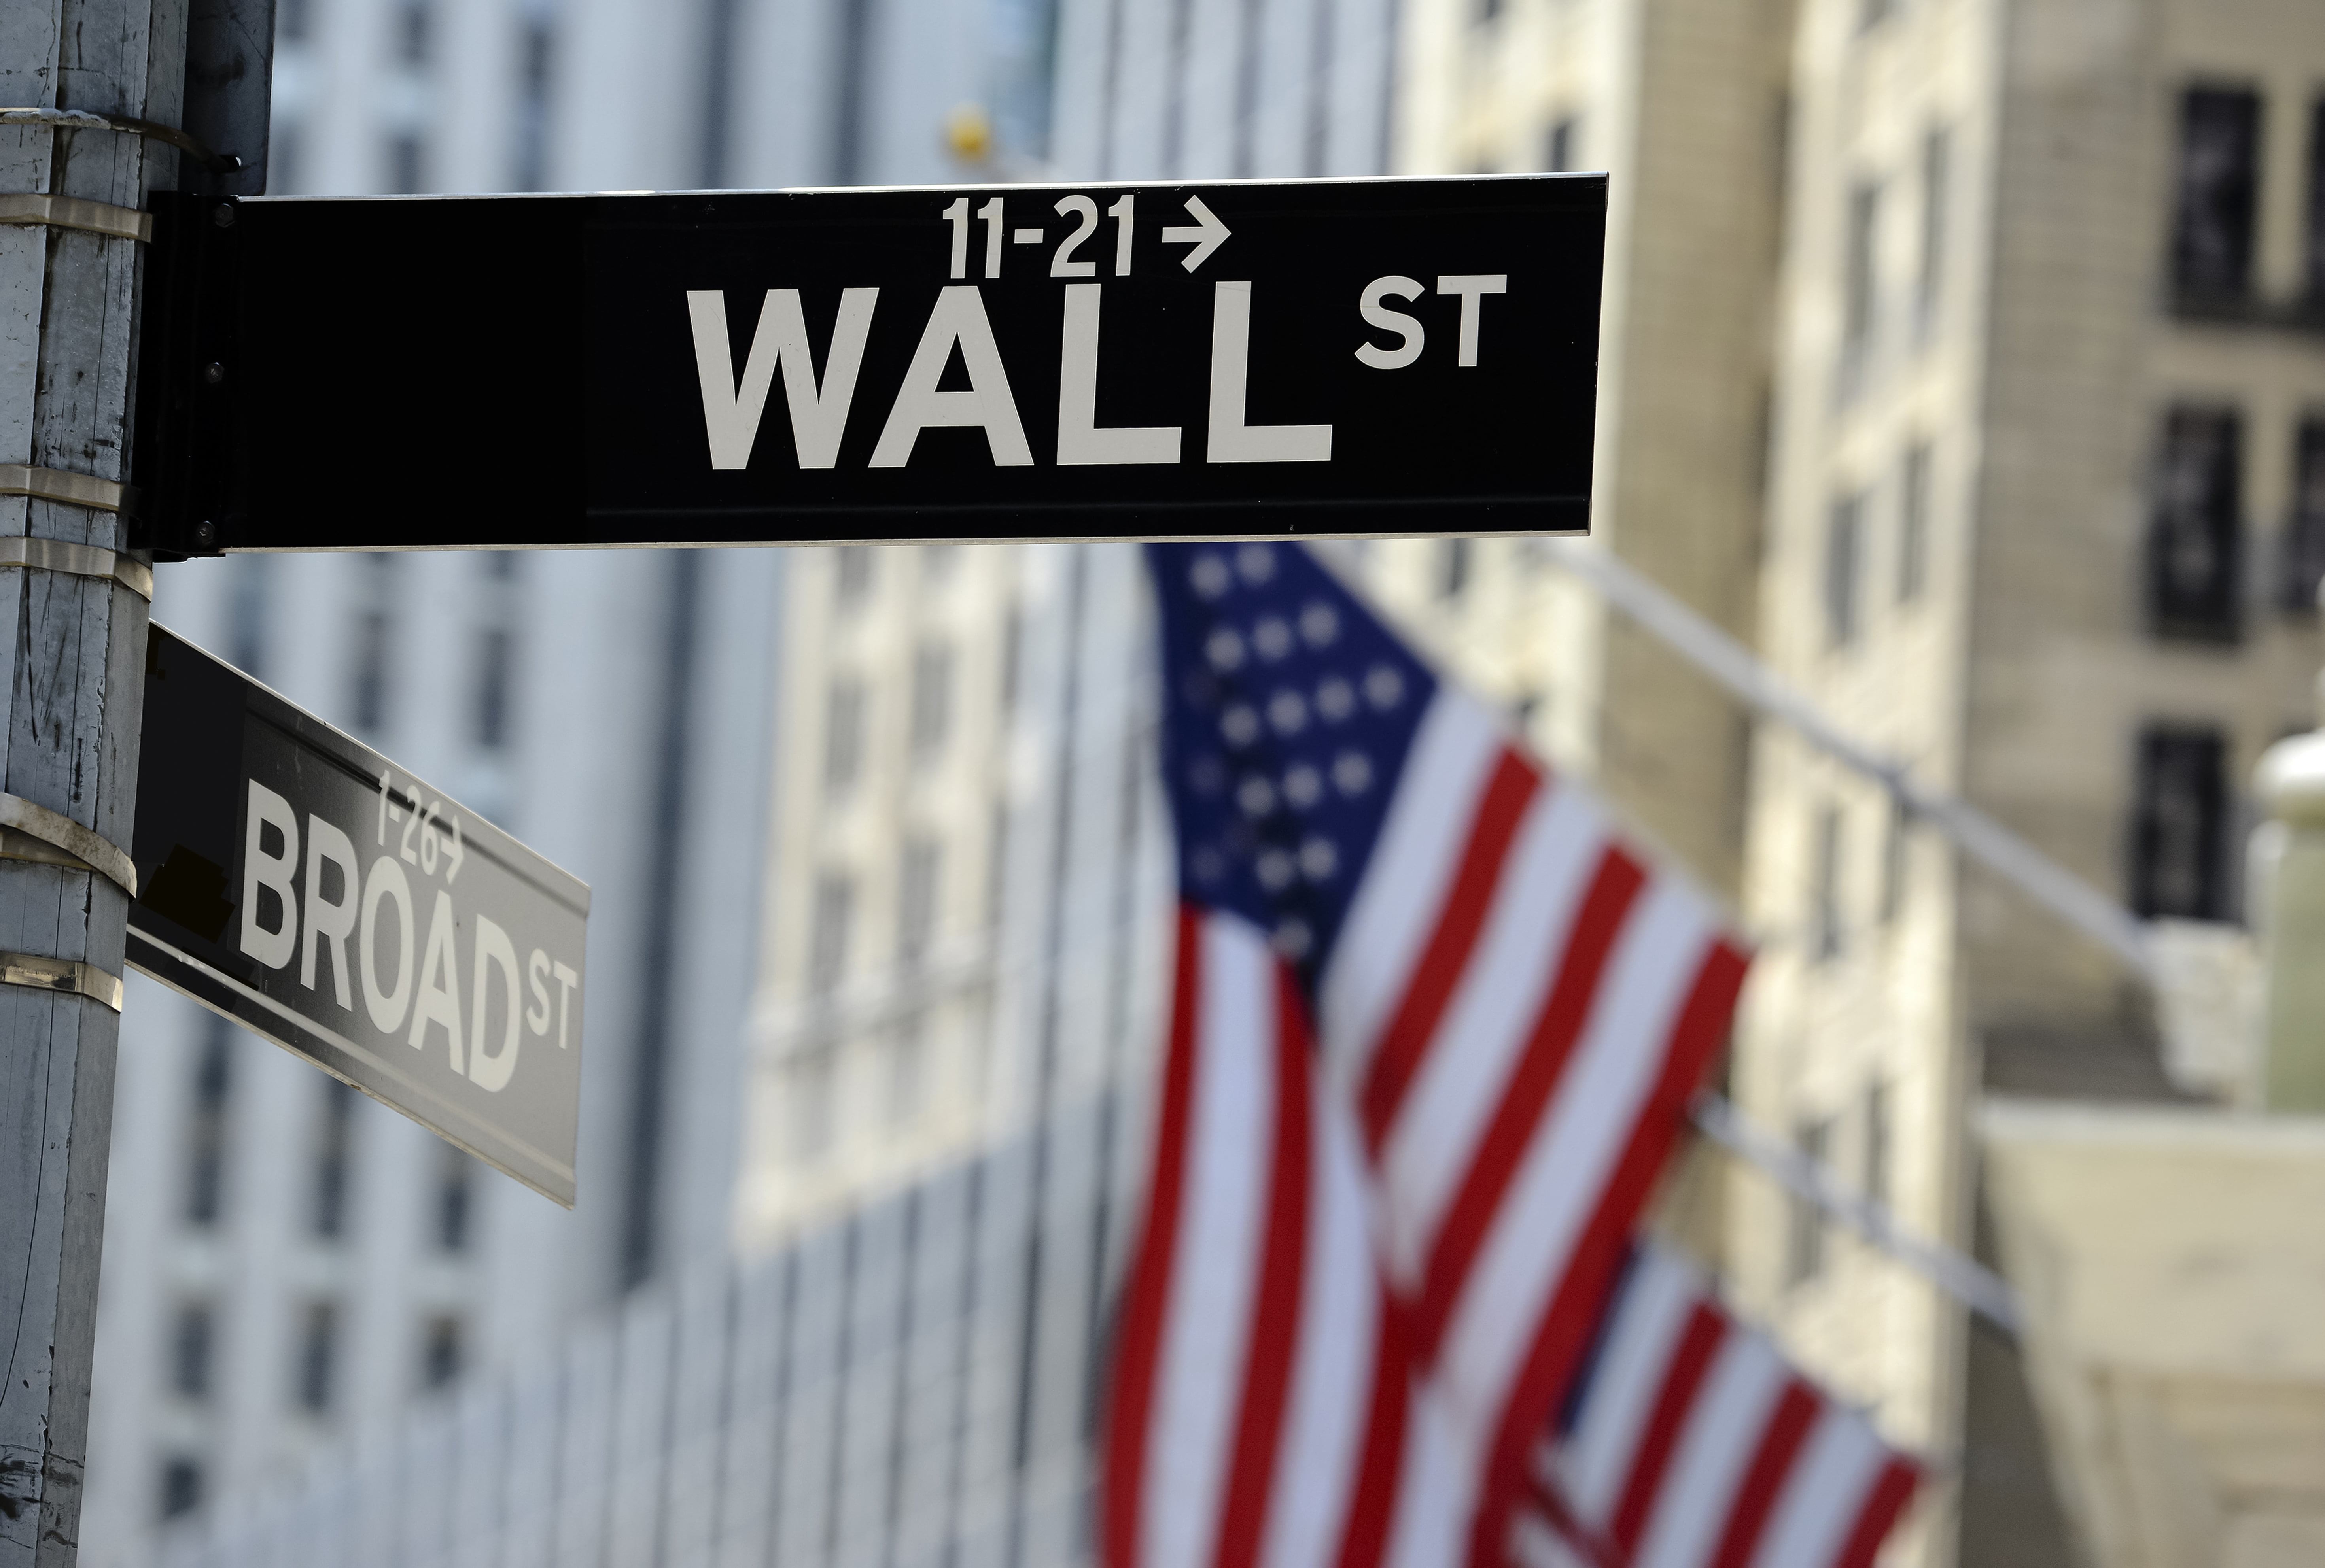 Bitcoin and Wall Street have opposing philosophies